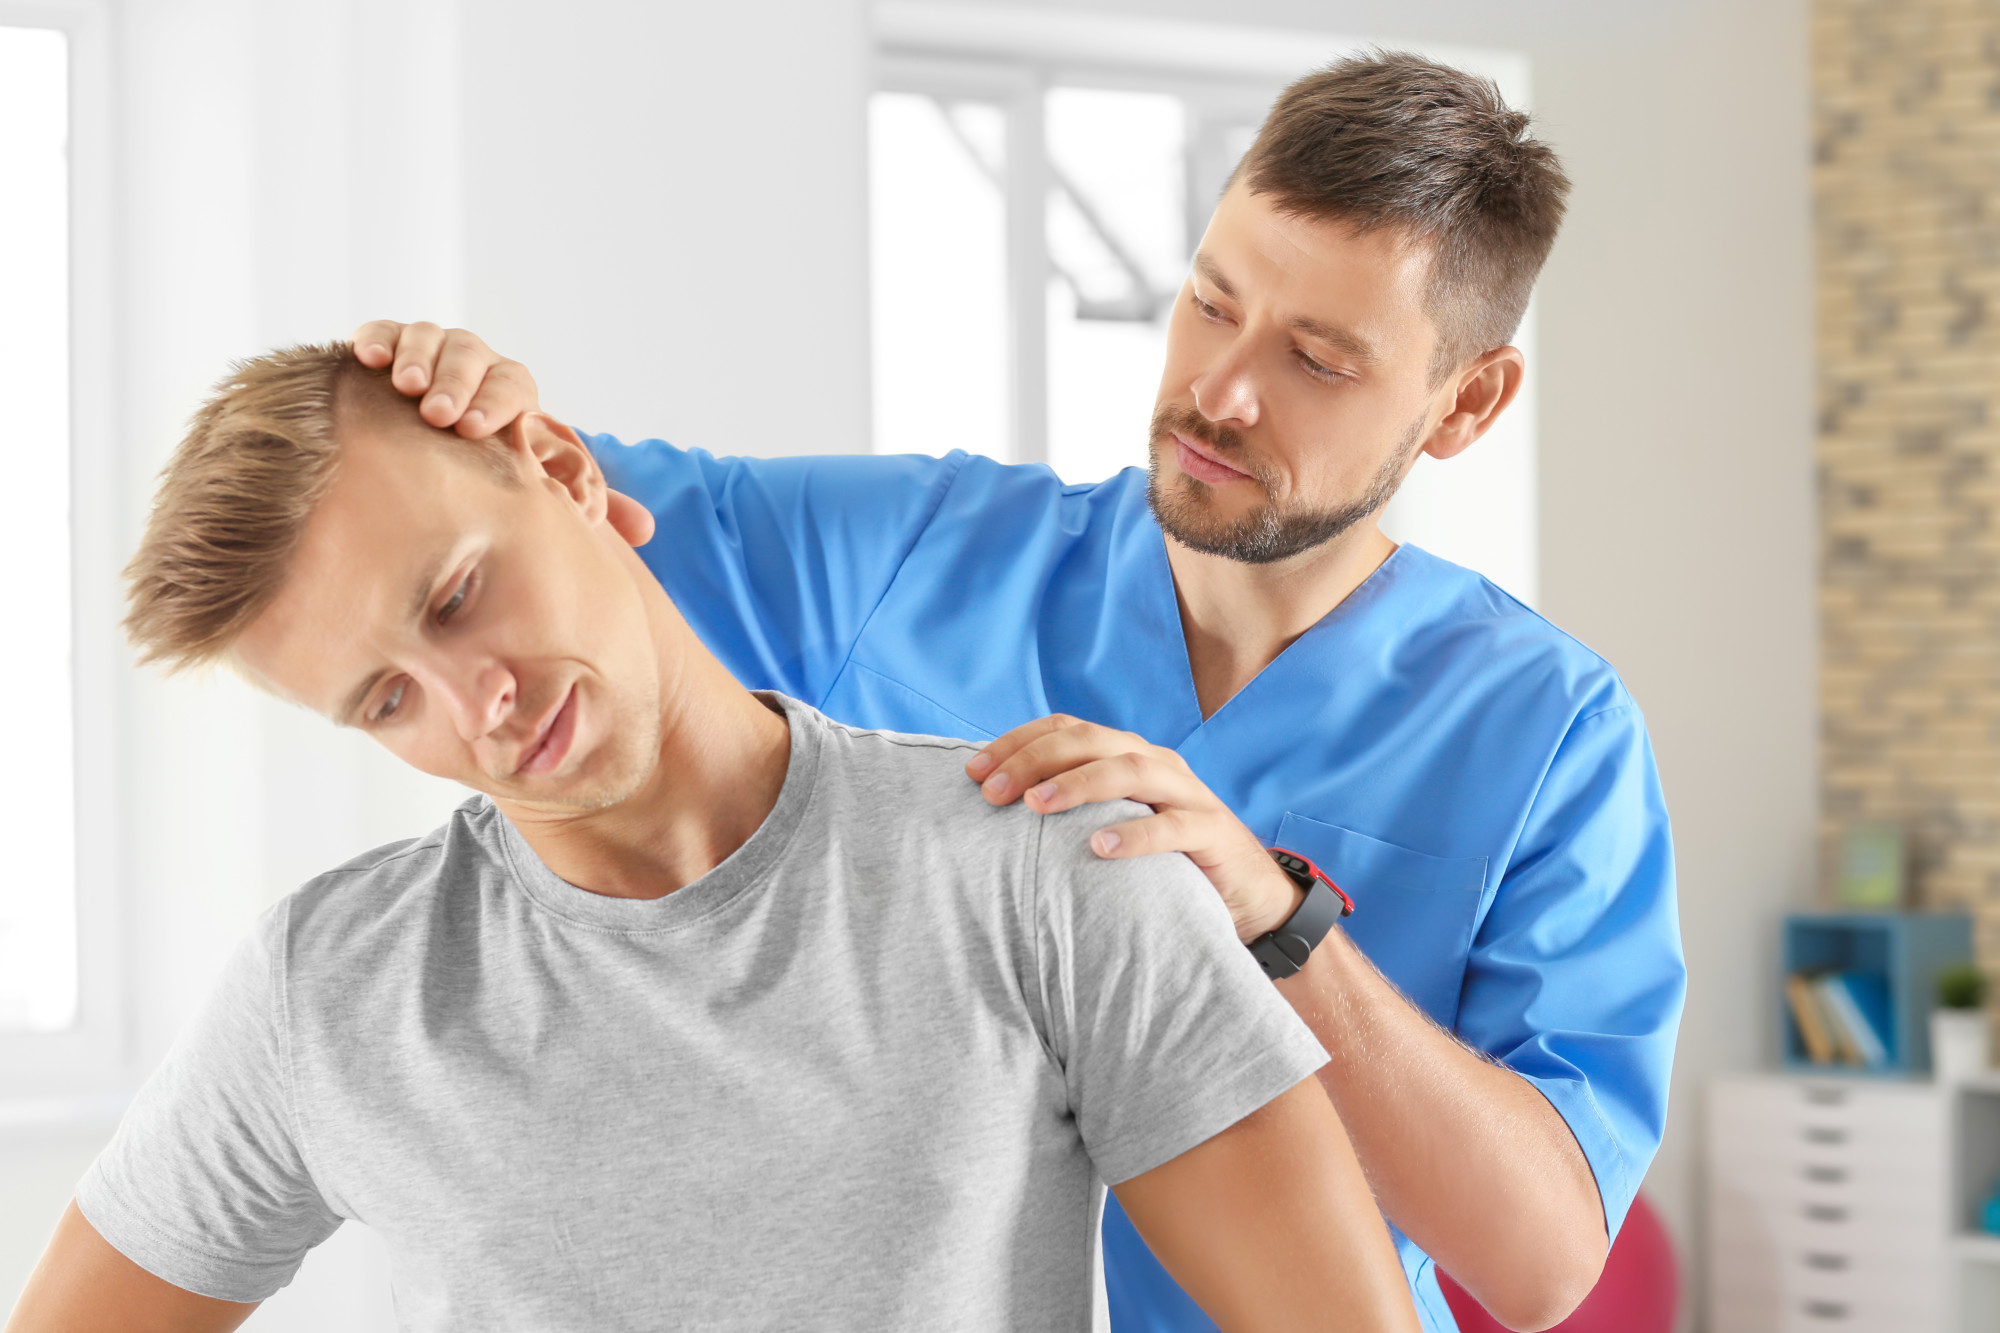 Can a Chiropractor Help a Pinched Nerve?